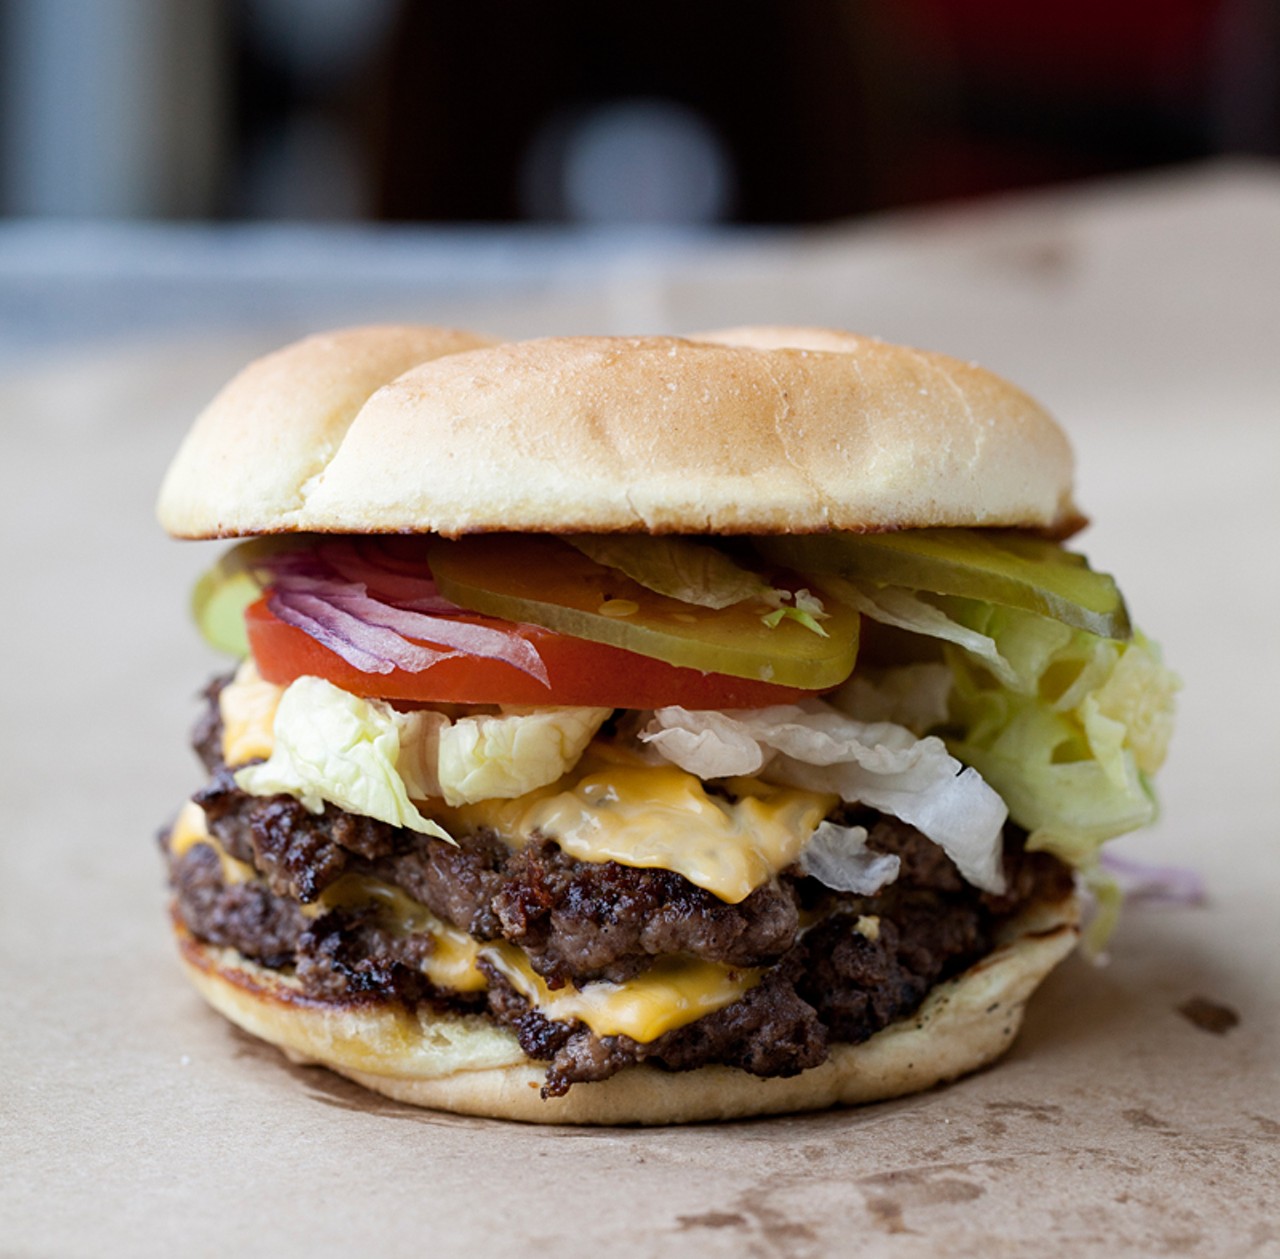 Rain Crow Ranch of Gape Girardeau is the source of the grass-fed beef in this double cheeseburger with lettuce, tomato, red onion and pickles.